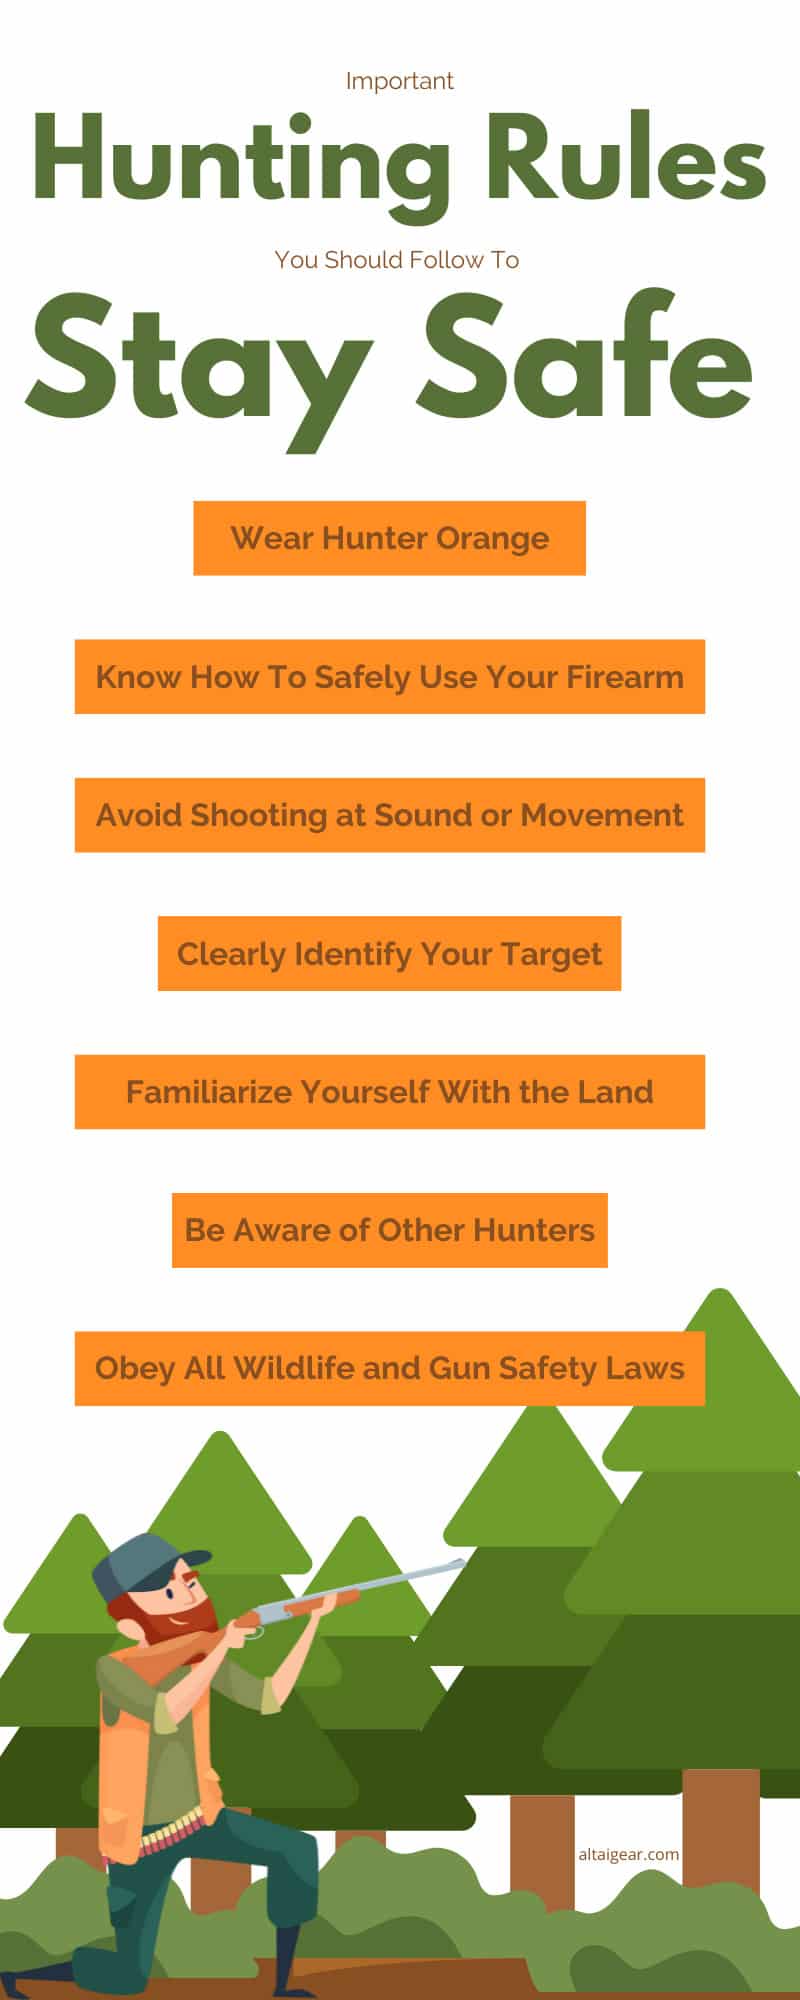 Important Hunting Rules You Should Follow To Stay Safe